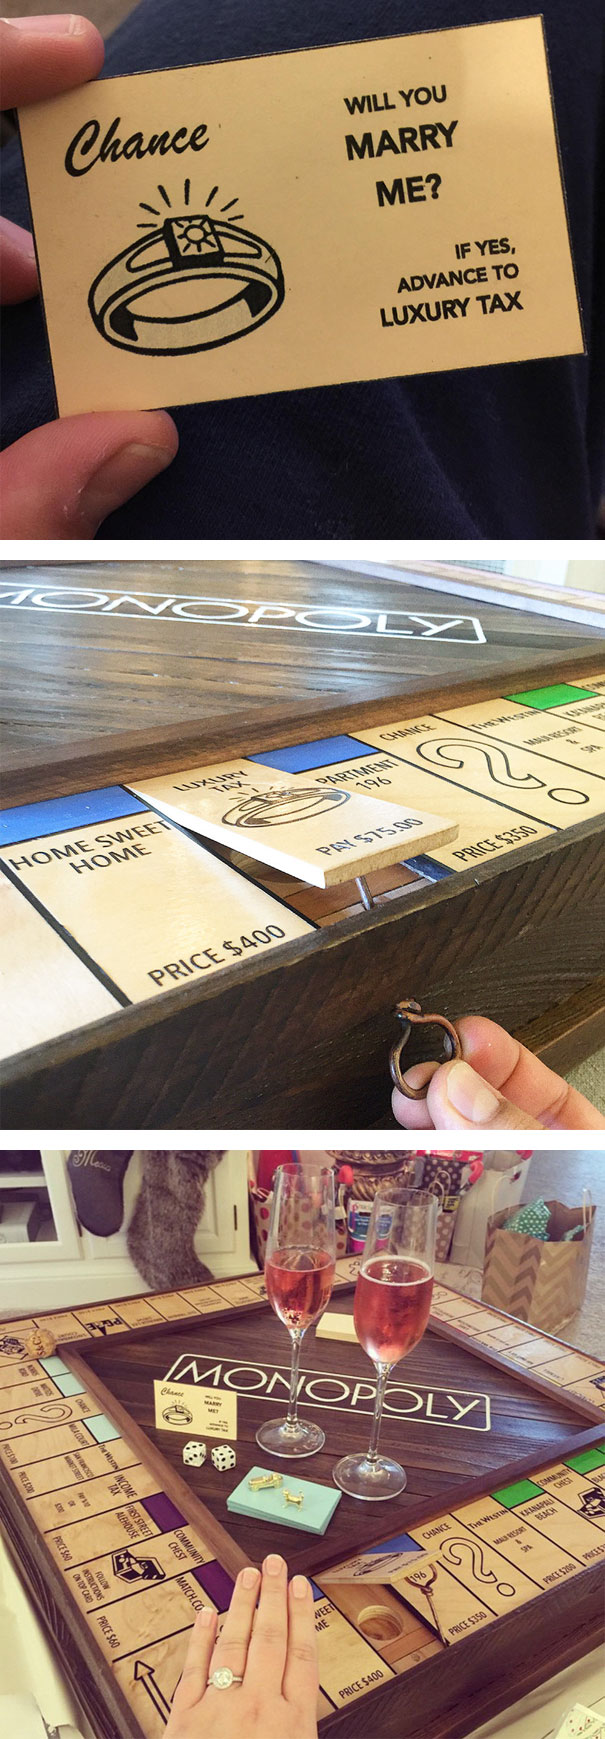 Proposal Using Custom-Made Monopoly Board With Secret Compartment